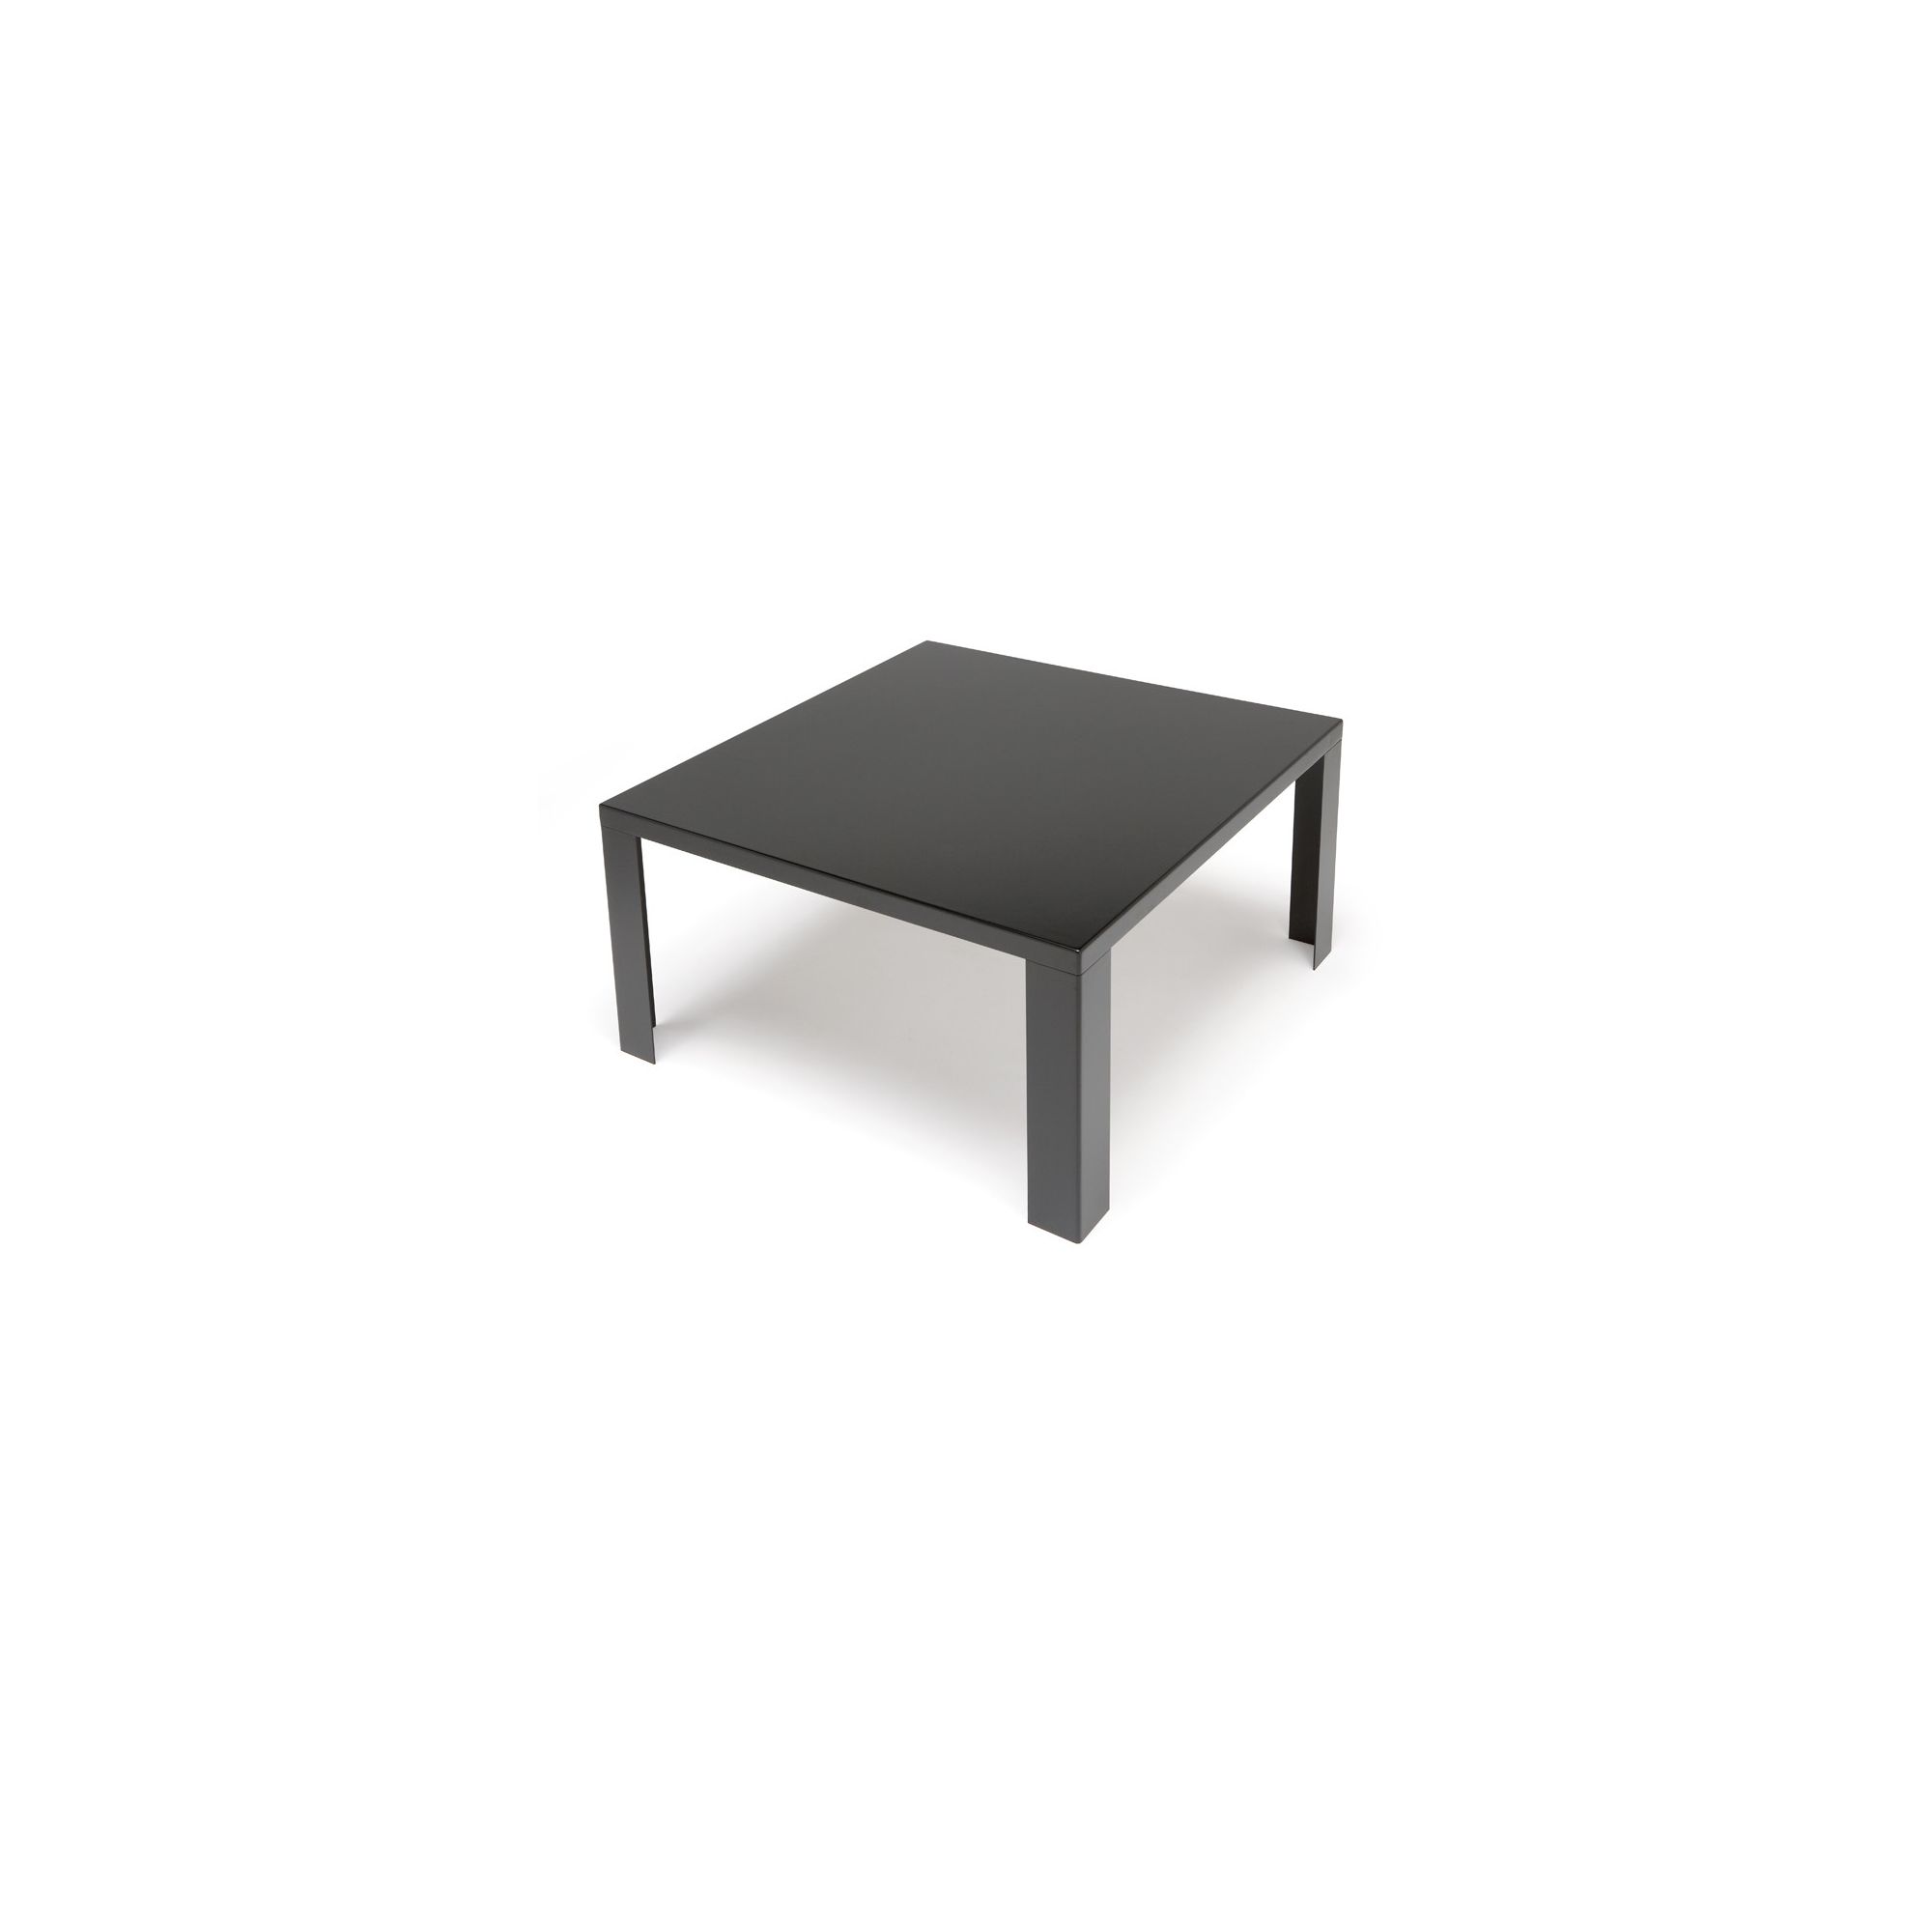 Andreu World Pure Coffee Table - 34cm x 80cm x 80cm - Black at Tesco Direct